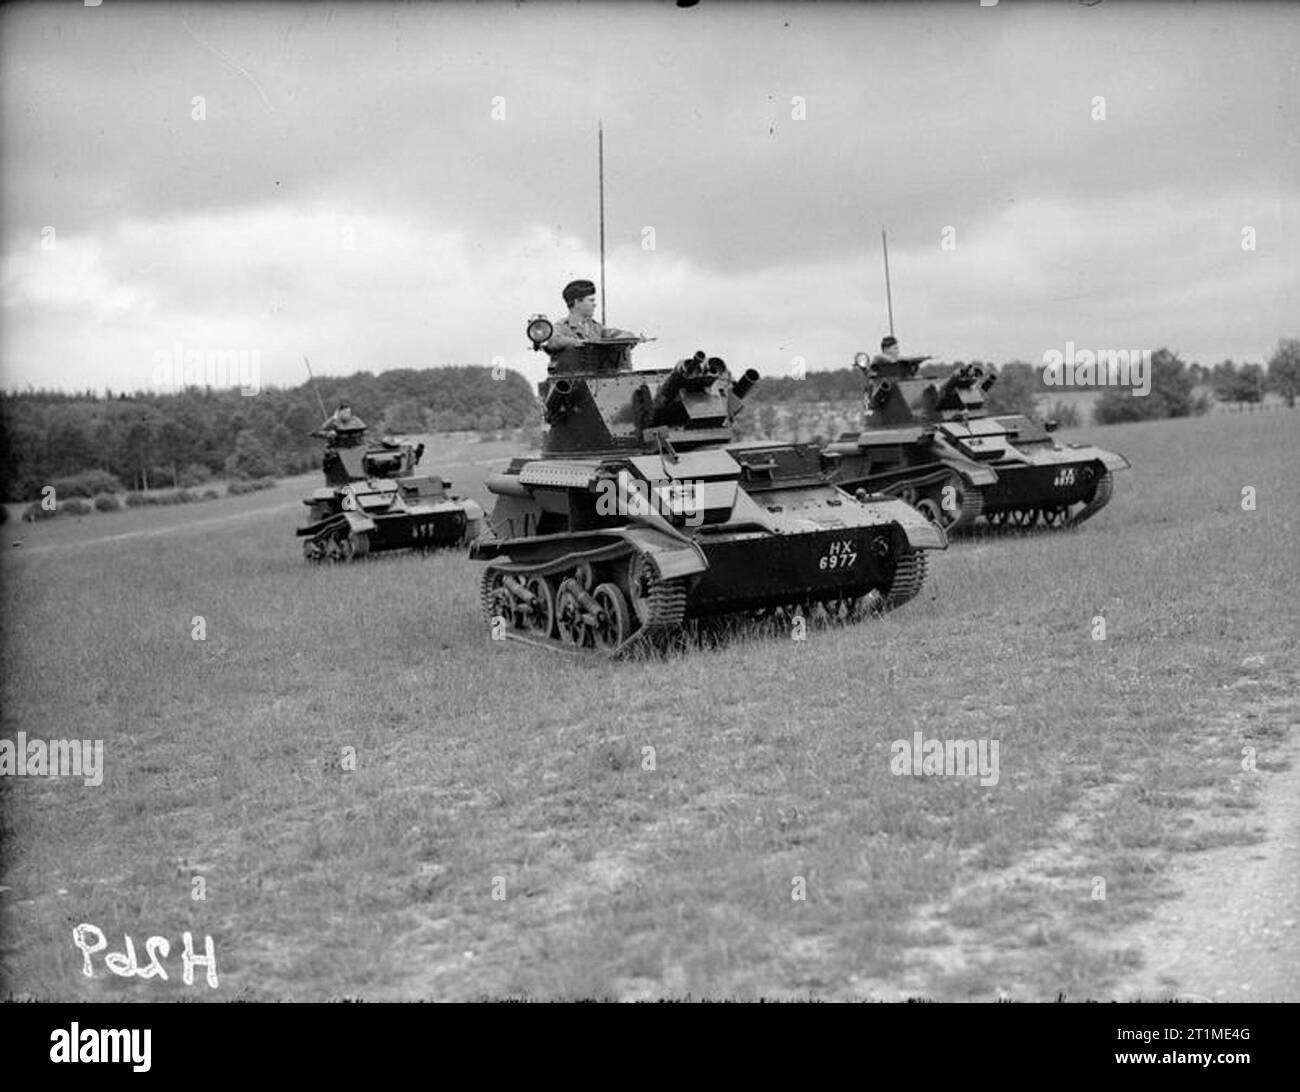 The British Army in the United Kingdom Light Tank Mk VIs of the 9th Lancers on manoeuvres at Tidworth, Wiltshire, 1938. Stock Photo